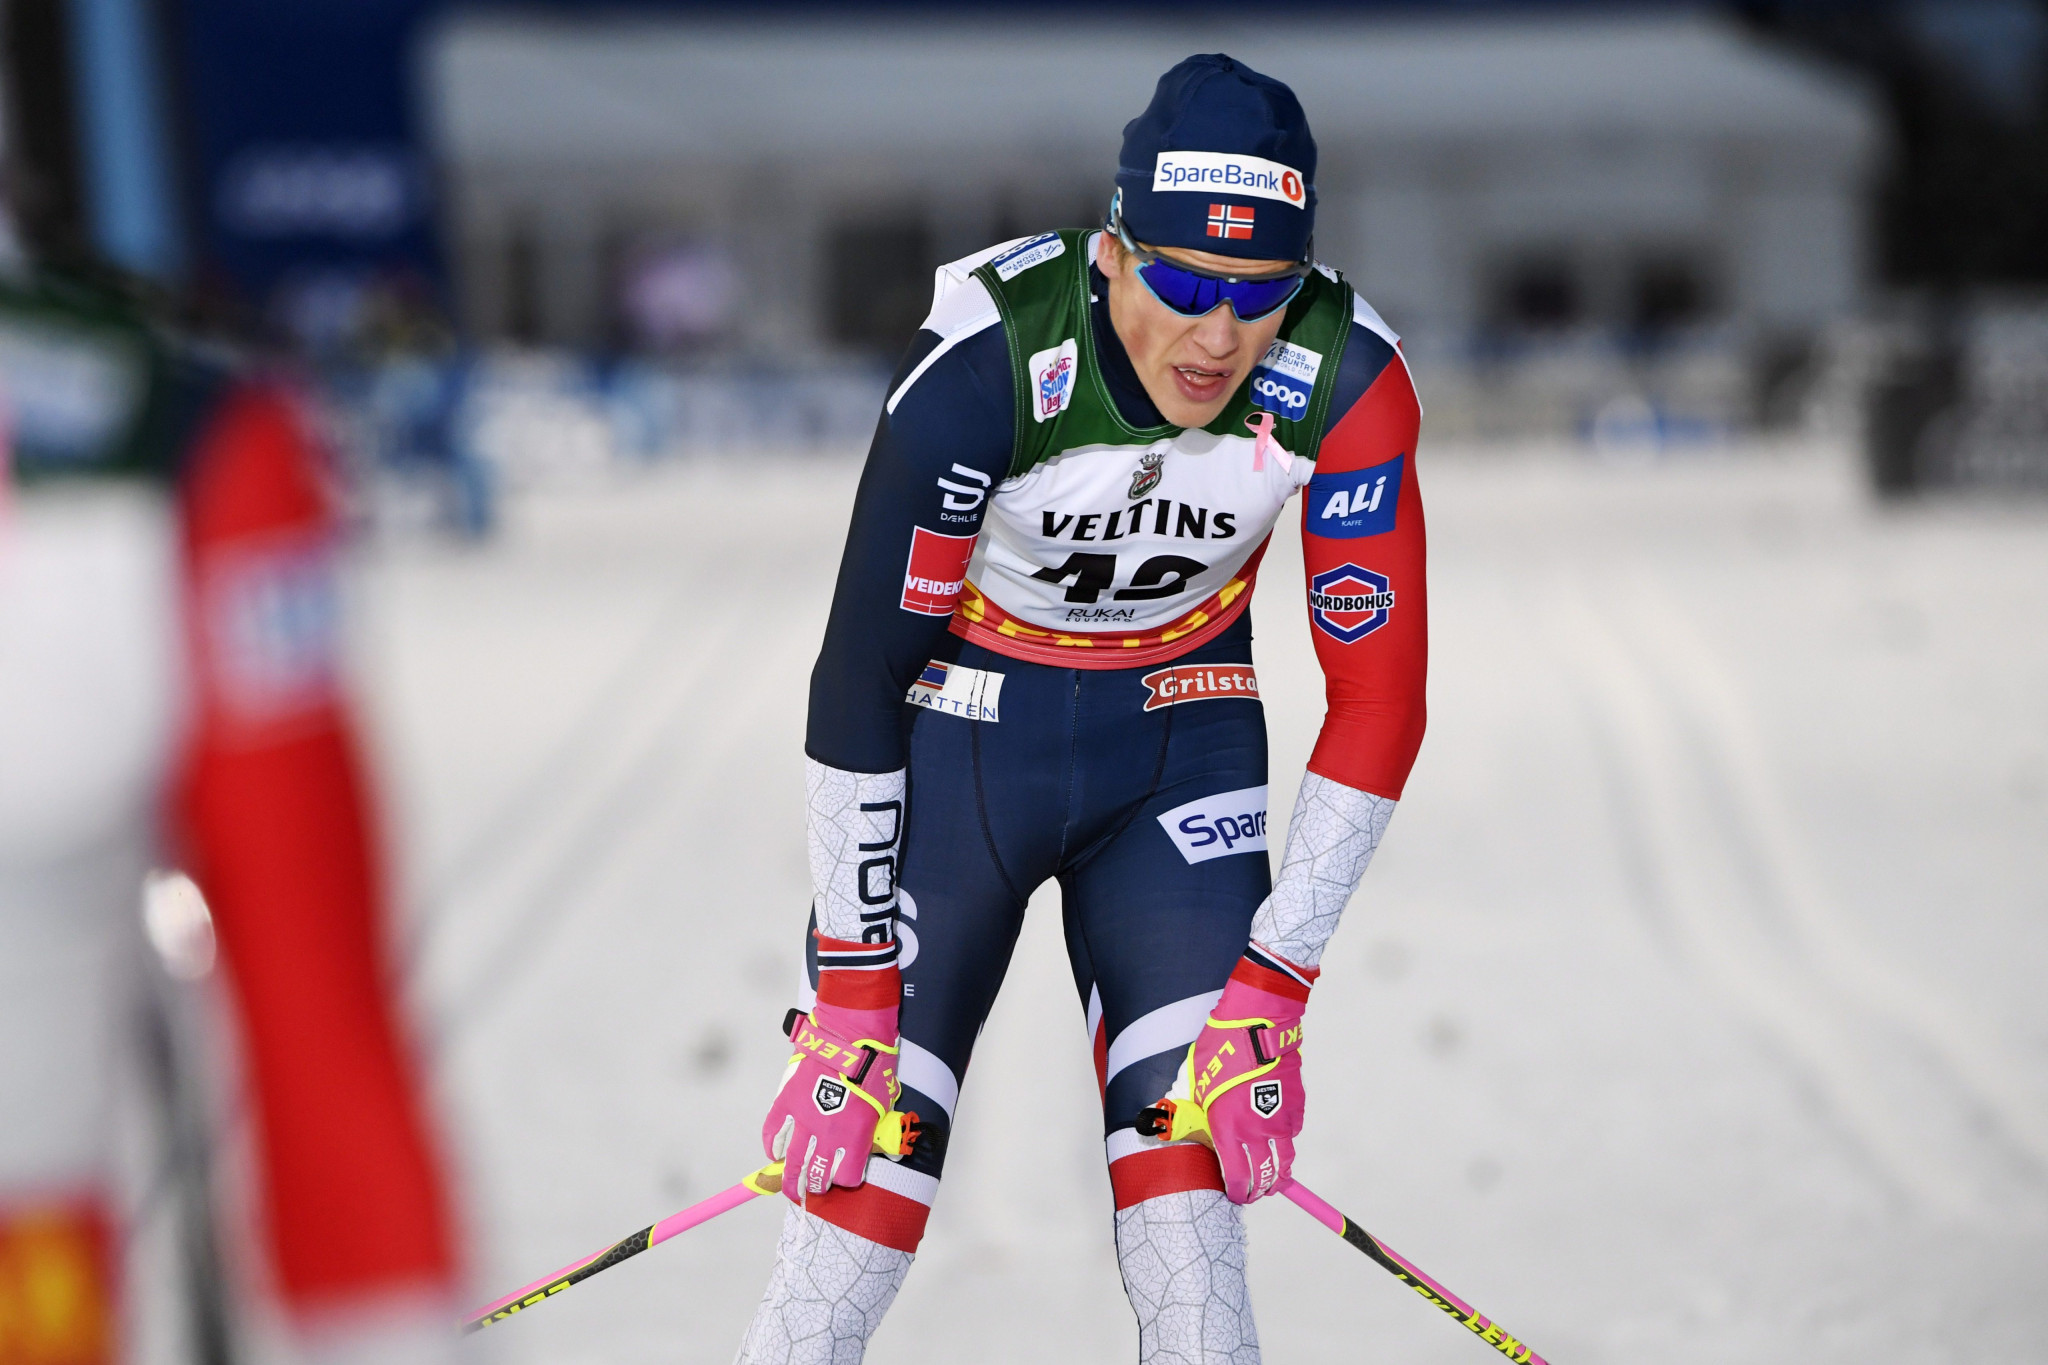 Sprint action to continue Tour de Ski in Val Müstair